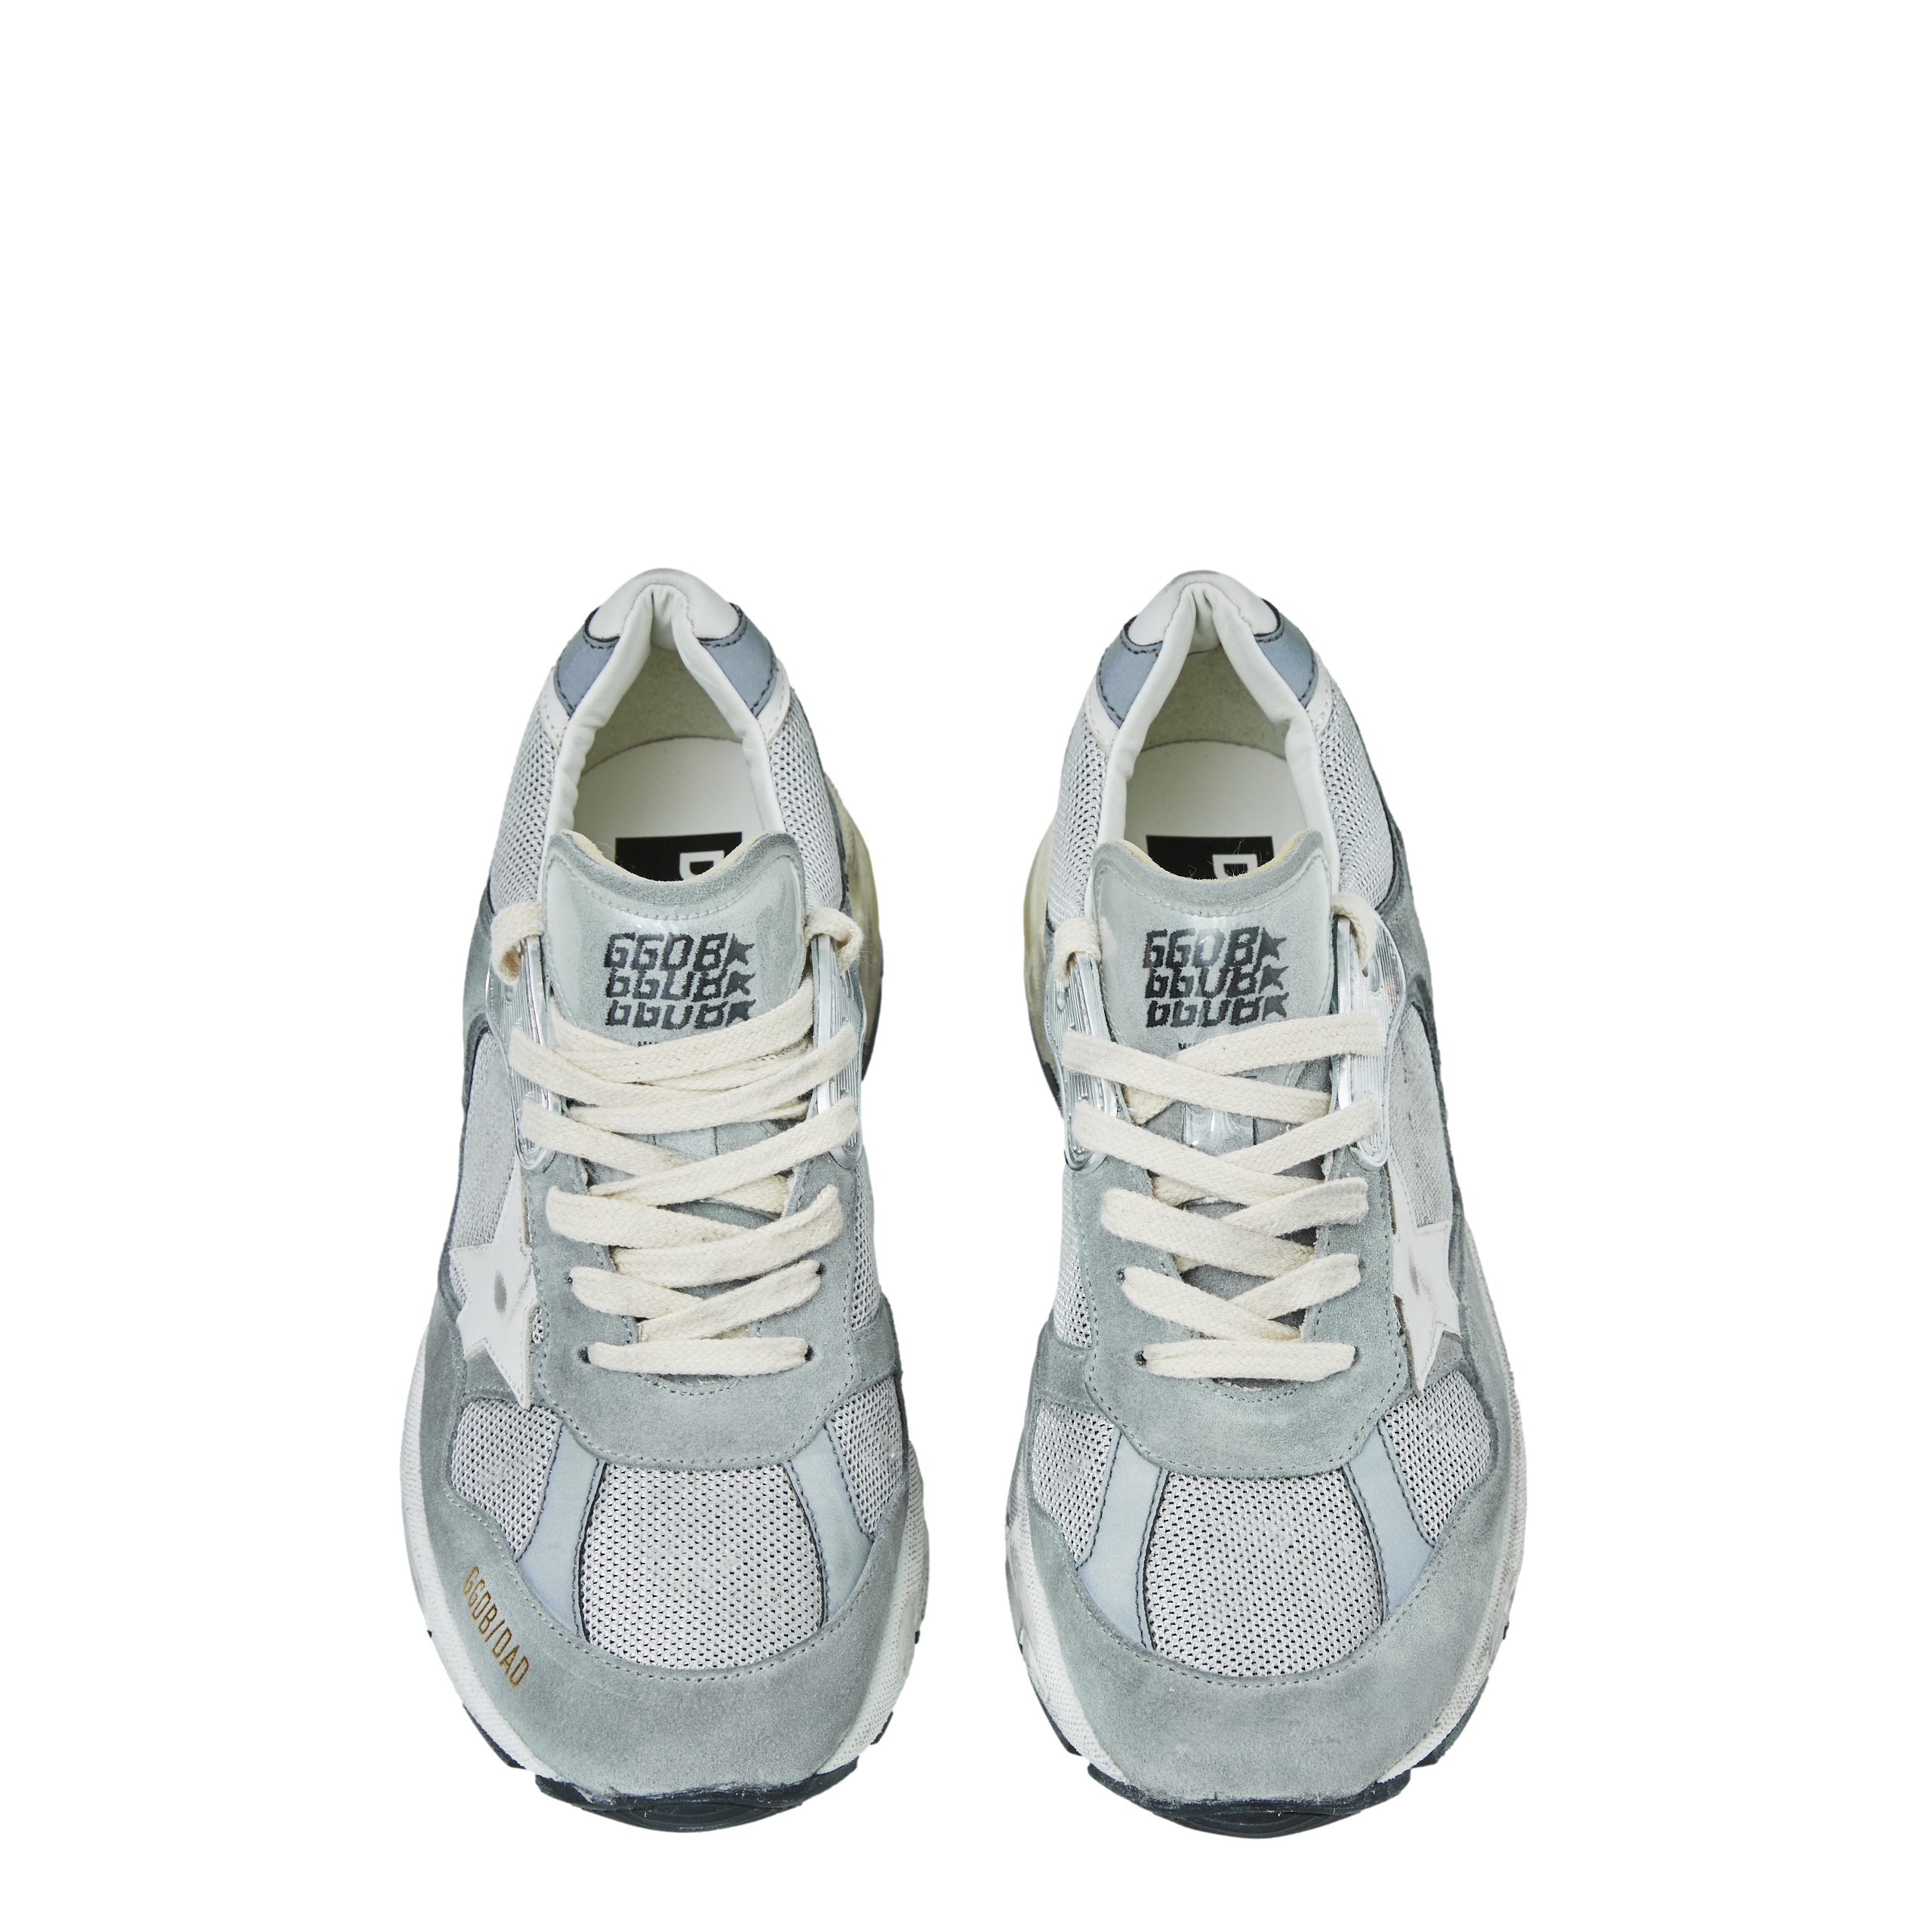 None Golden Goose Deluxe Brand GWF00558/F004944/60379, размер 39;40;41